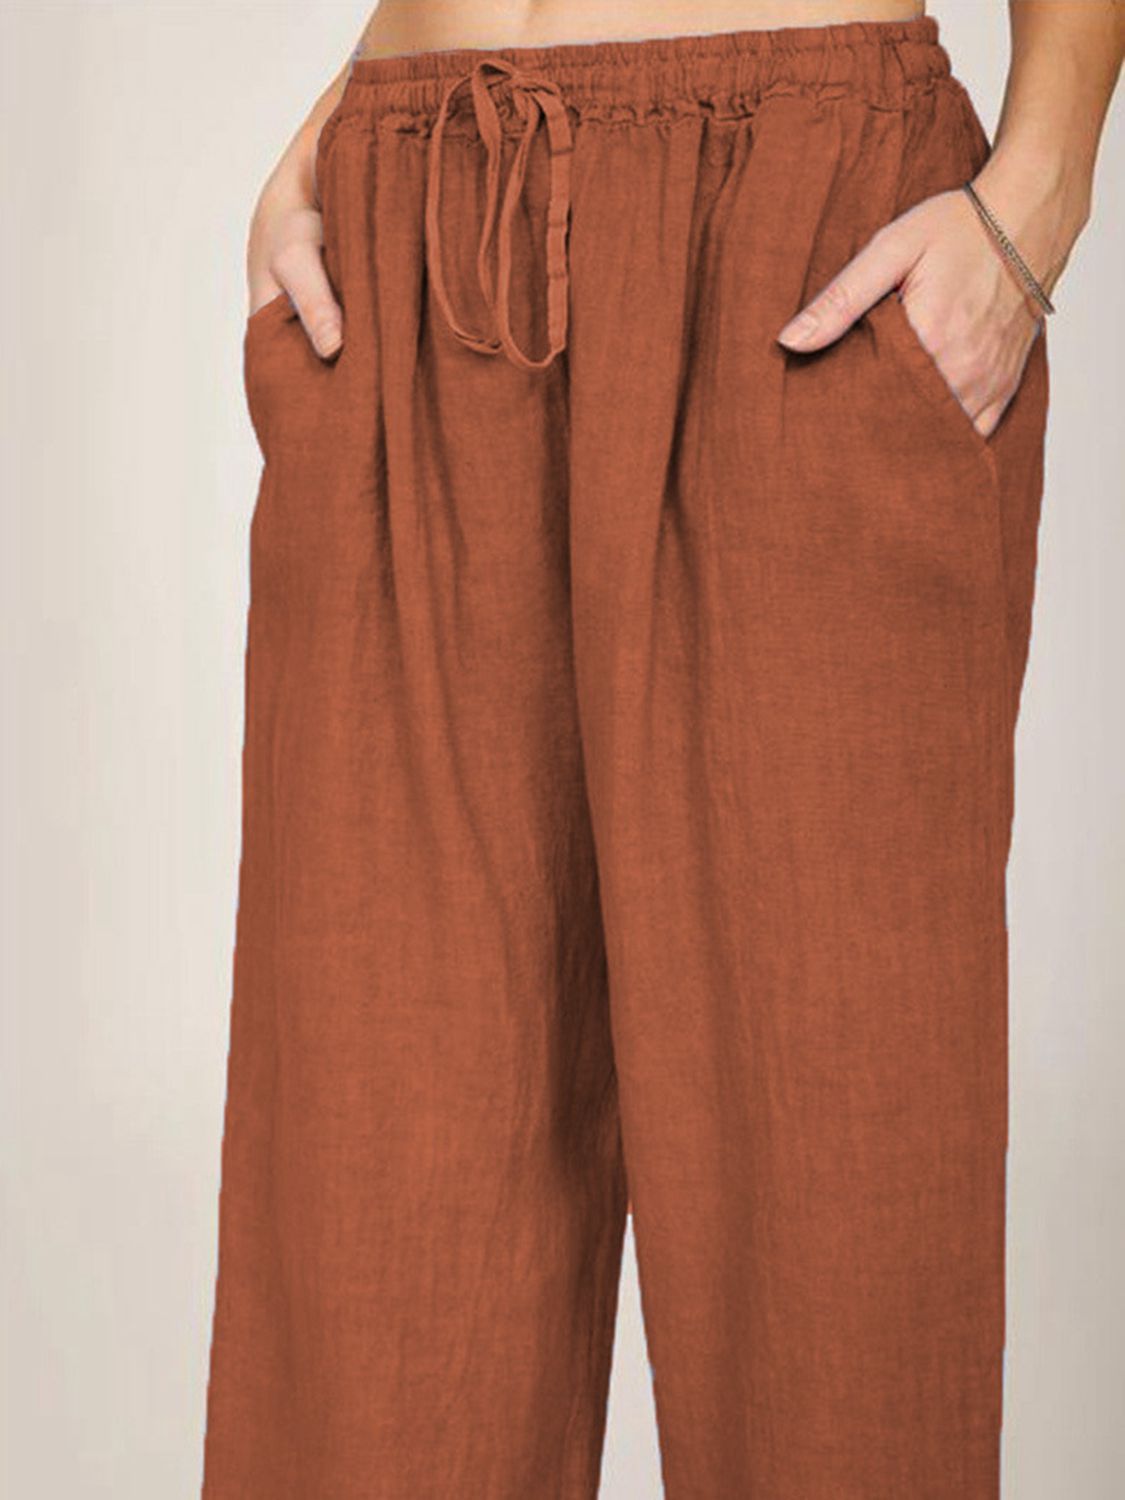 Full Size Long Pants Additional Options Available